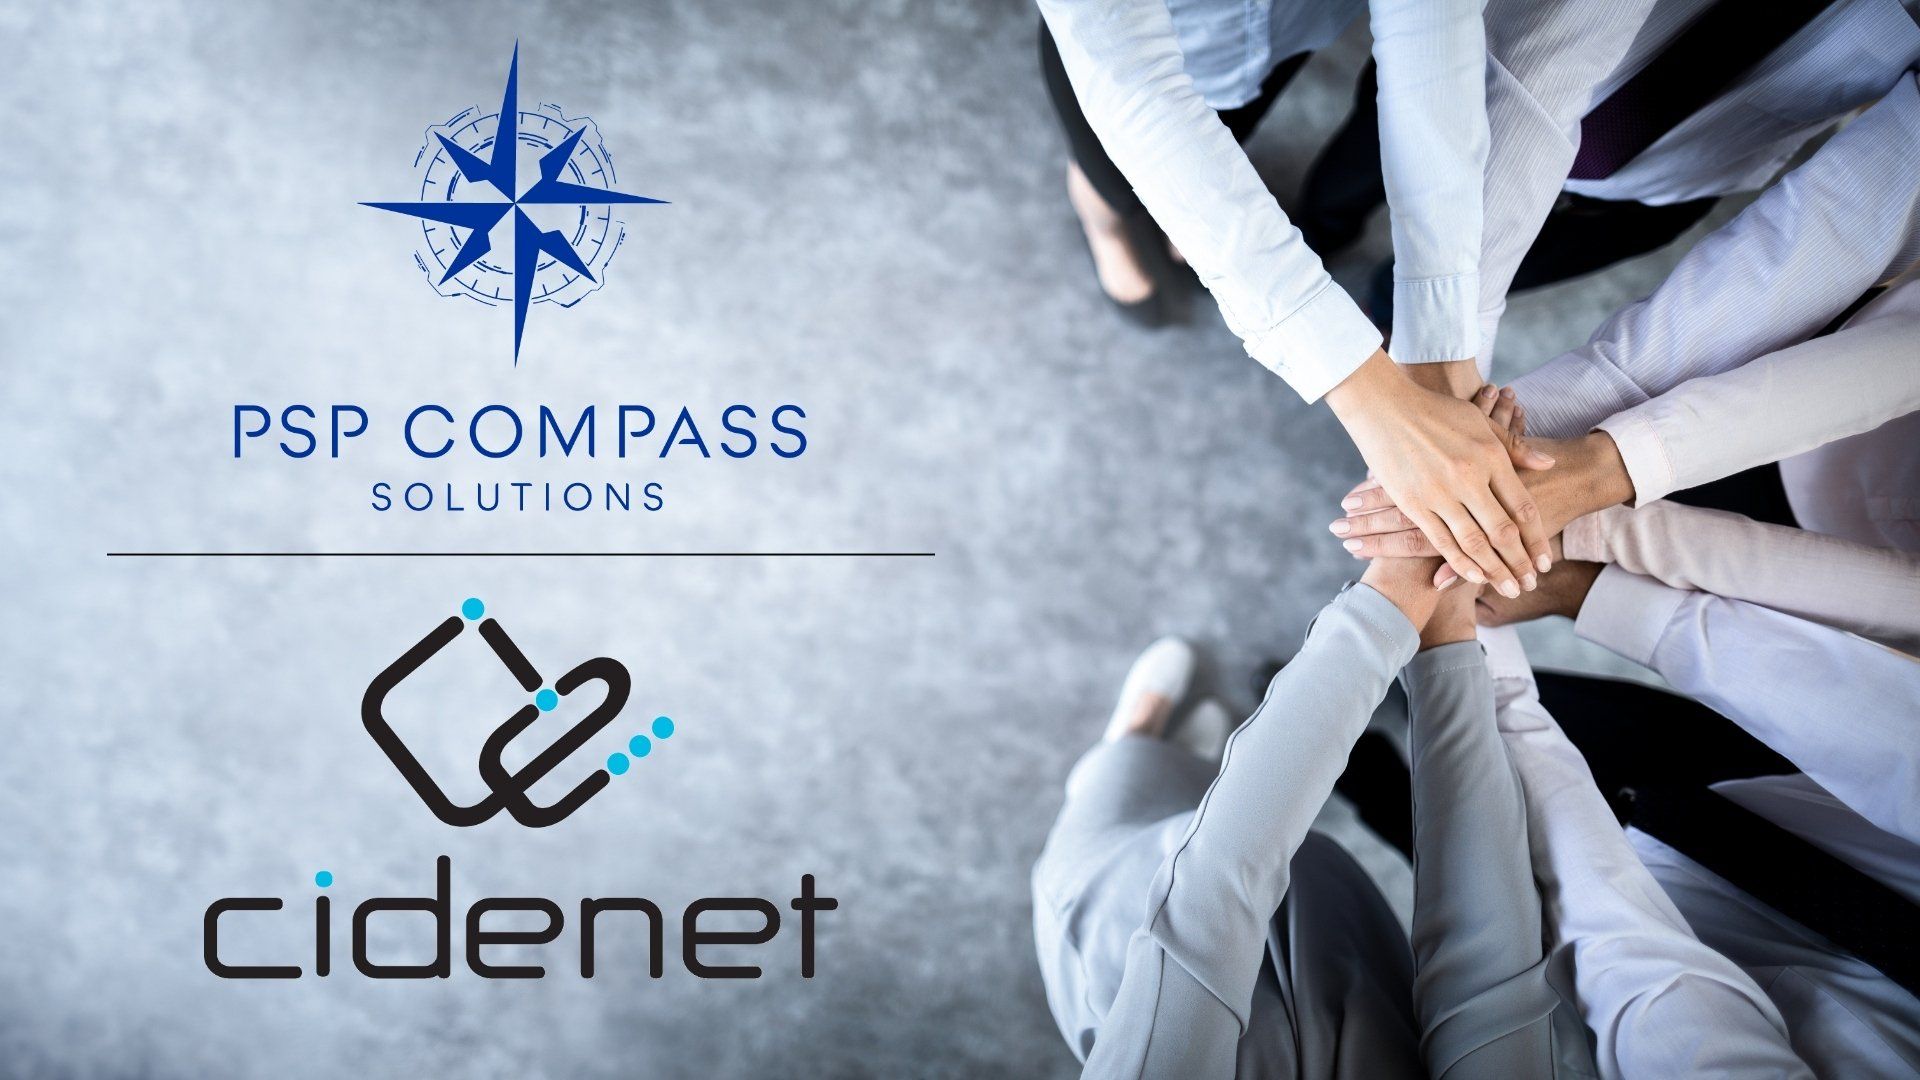 Partnership with Cidenet and PSP Compass Solutions